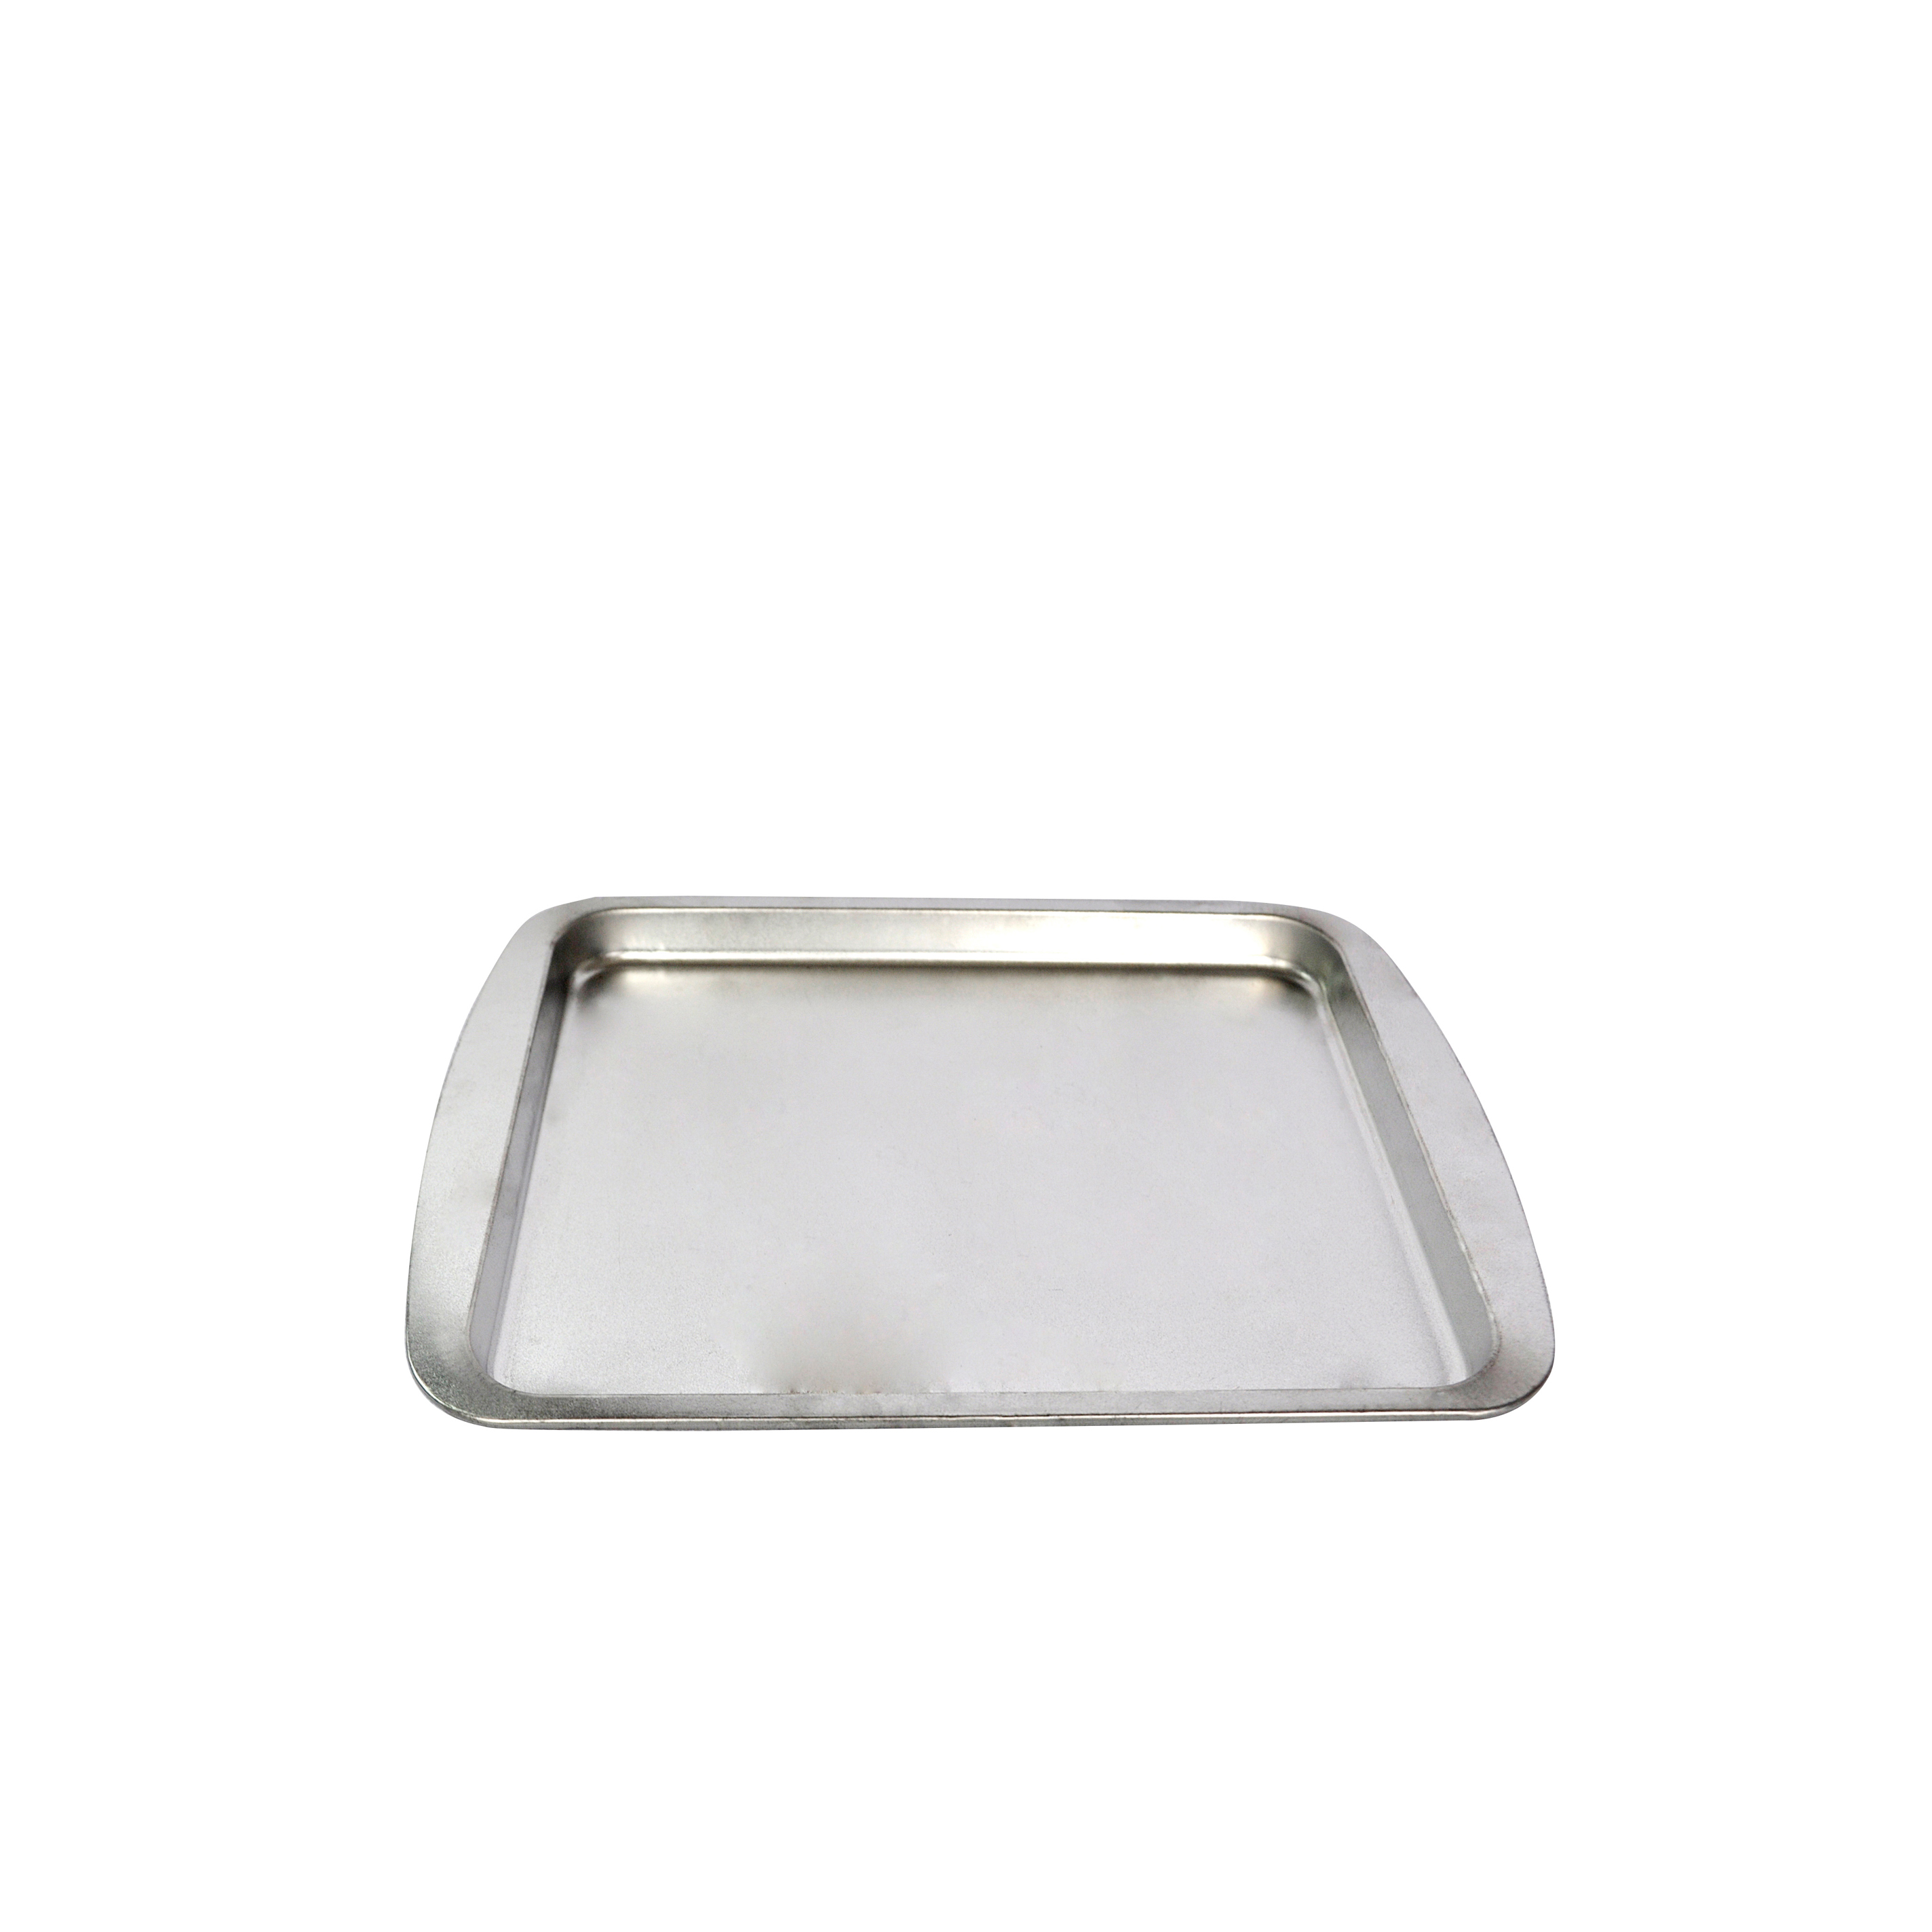 Bodenda factory wholesales high qualityfood packaging trays